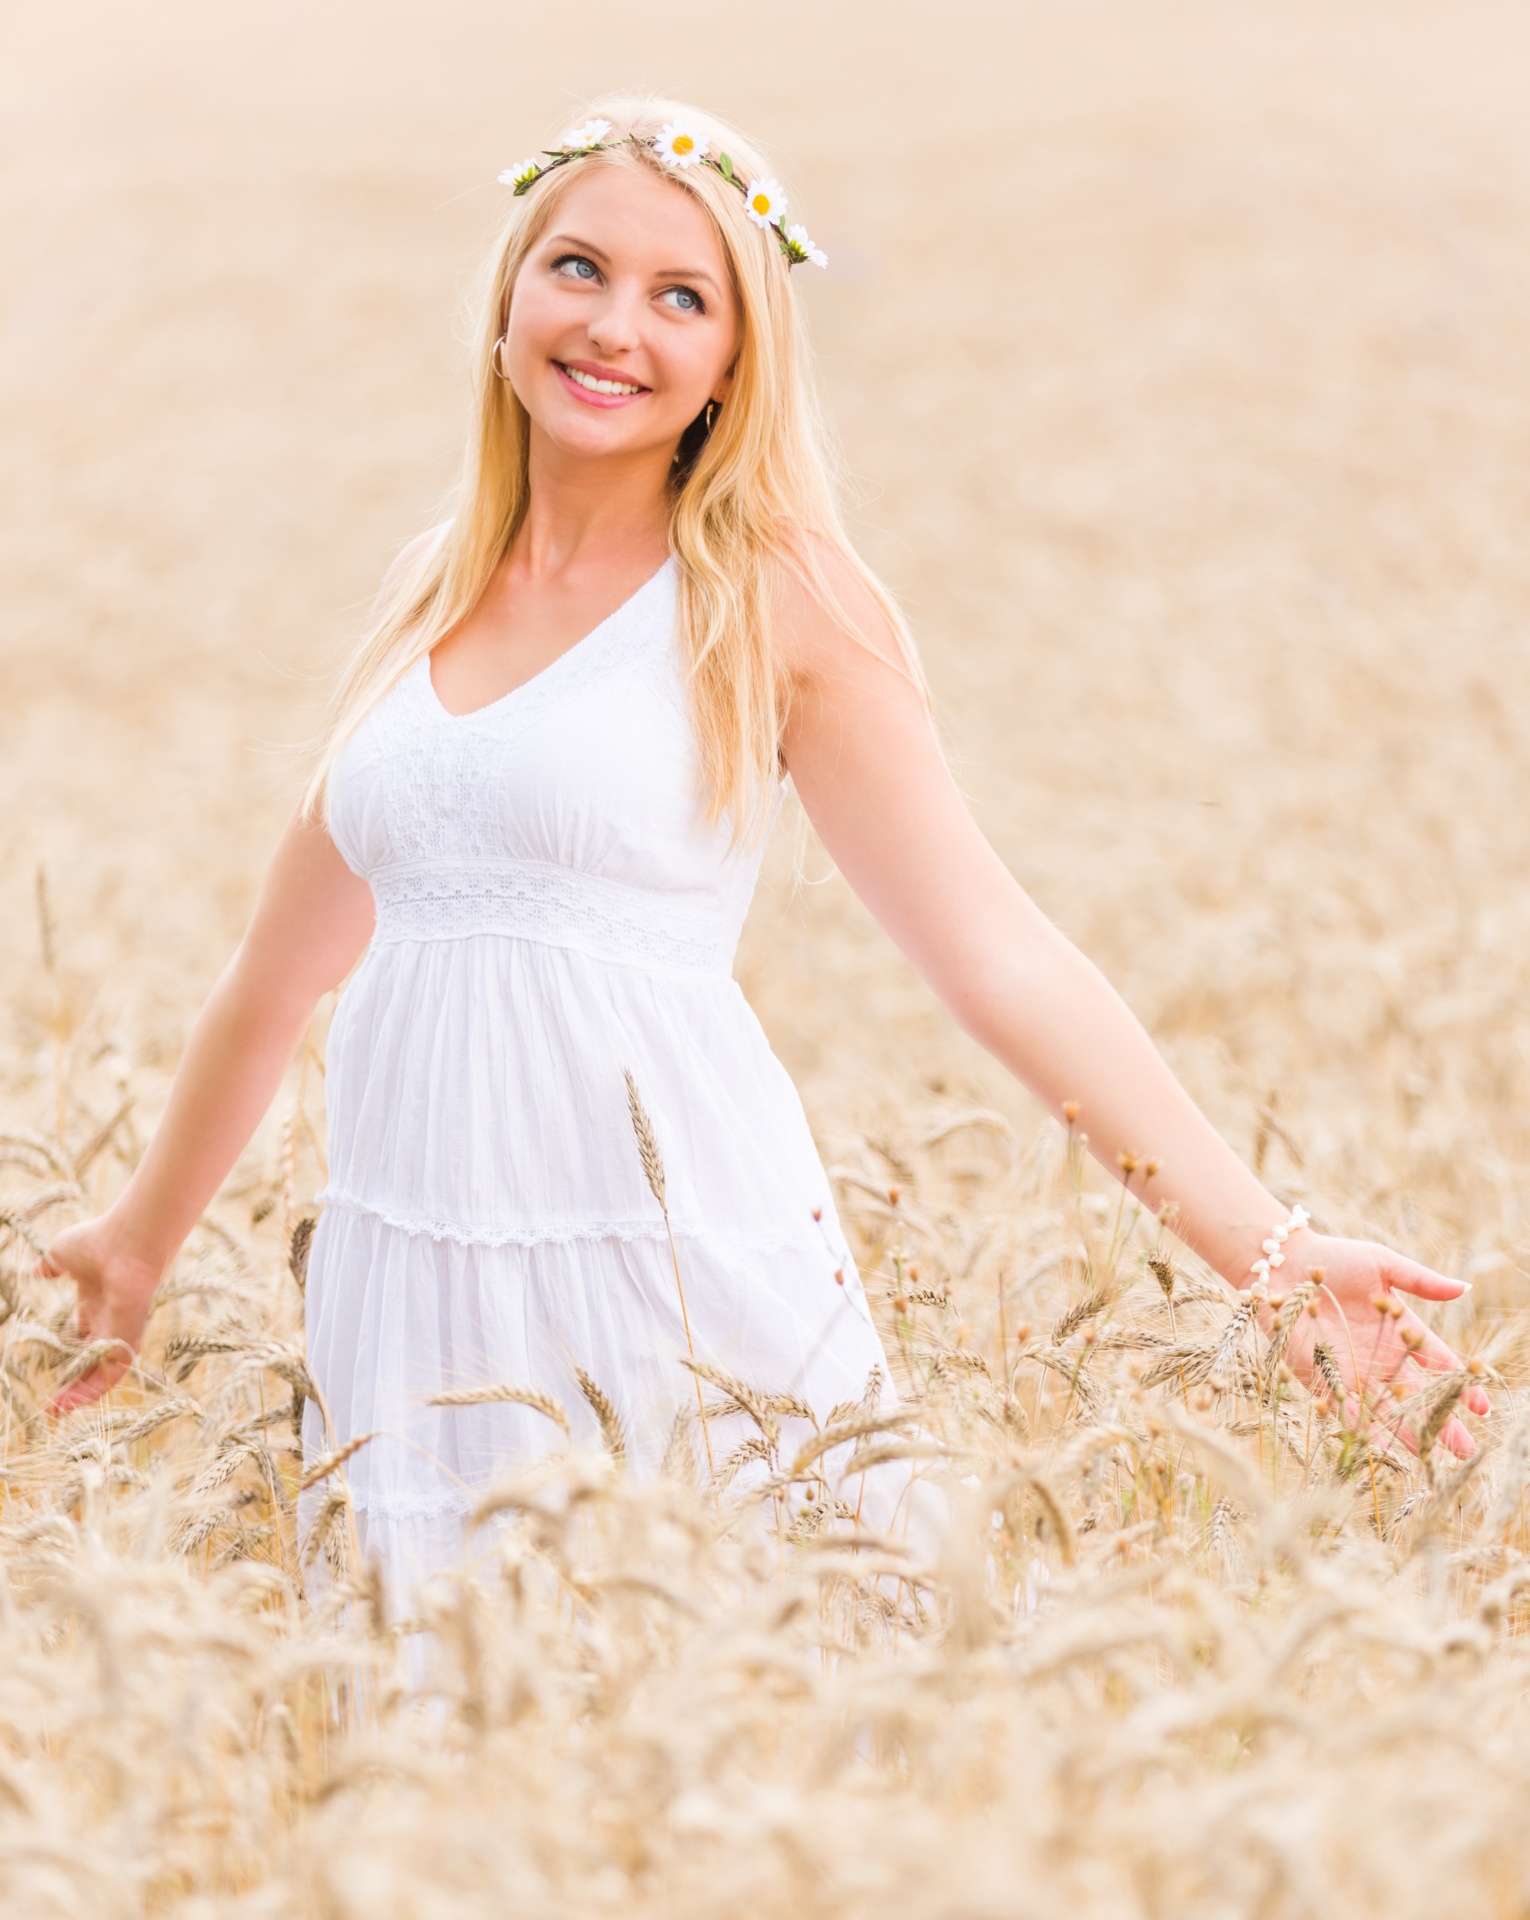 Young blond woman standing in golden wheat field in summer